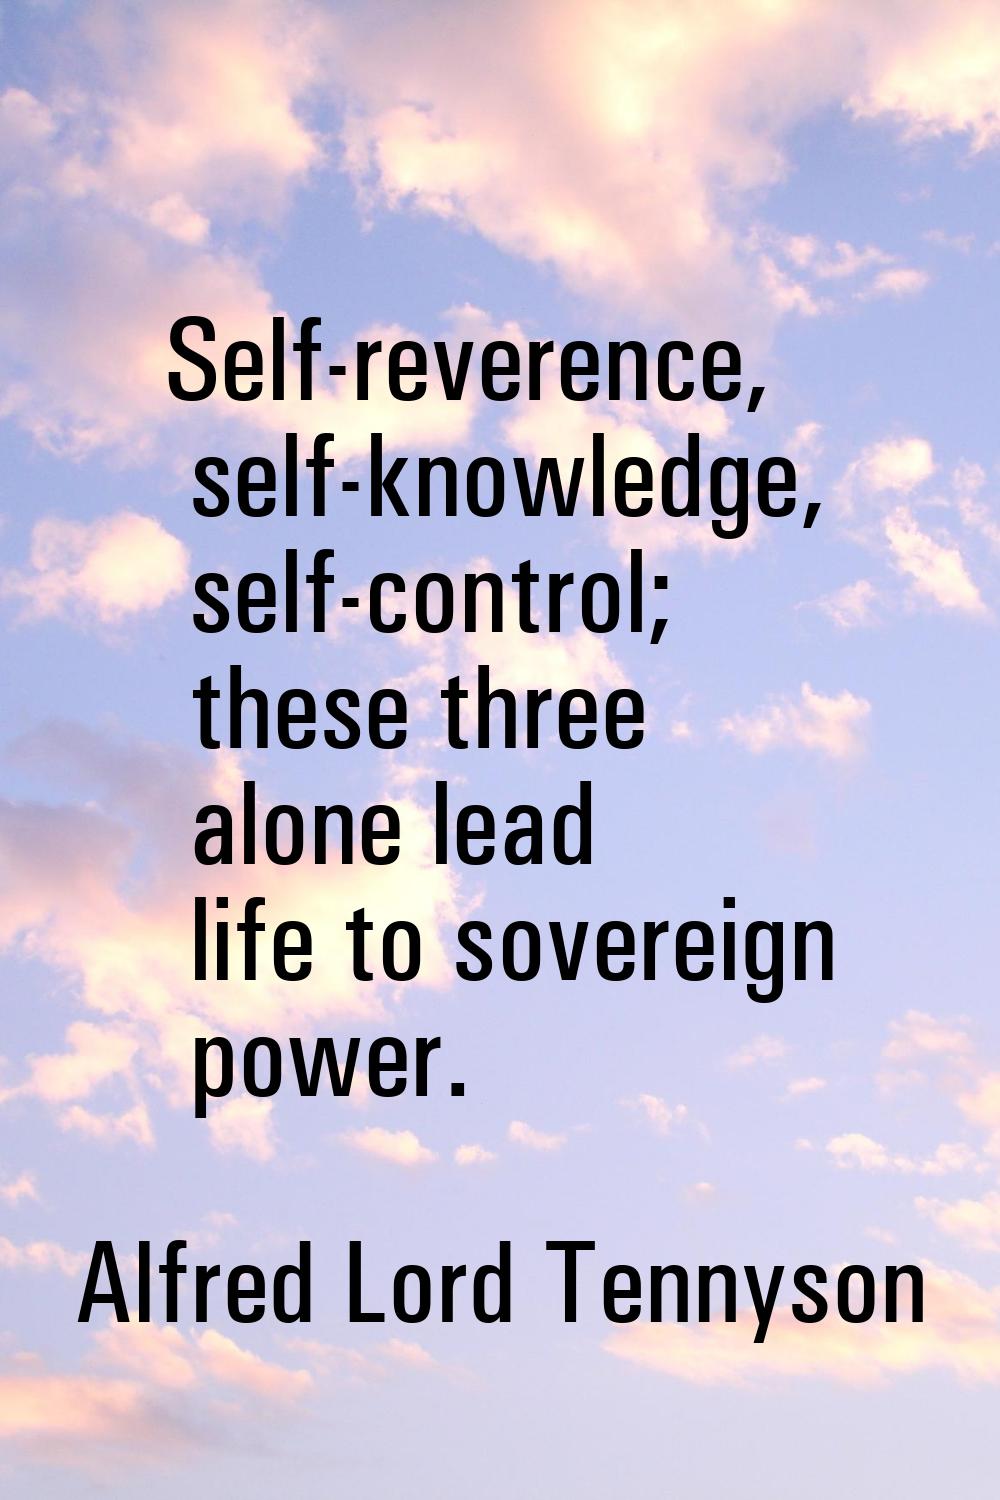 Self-reverence, self-knowledge, self-control; these three alone lead life to sovereign power.